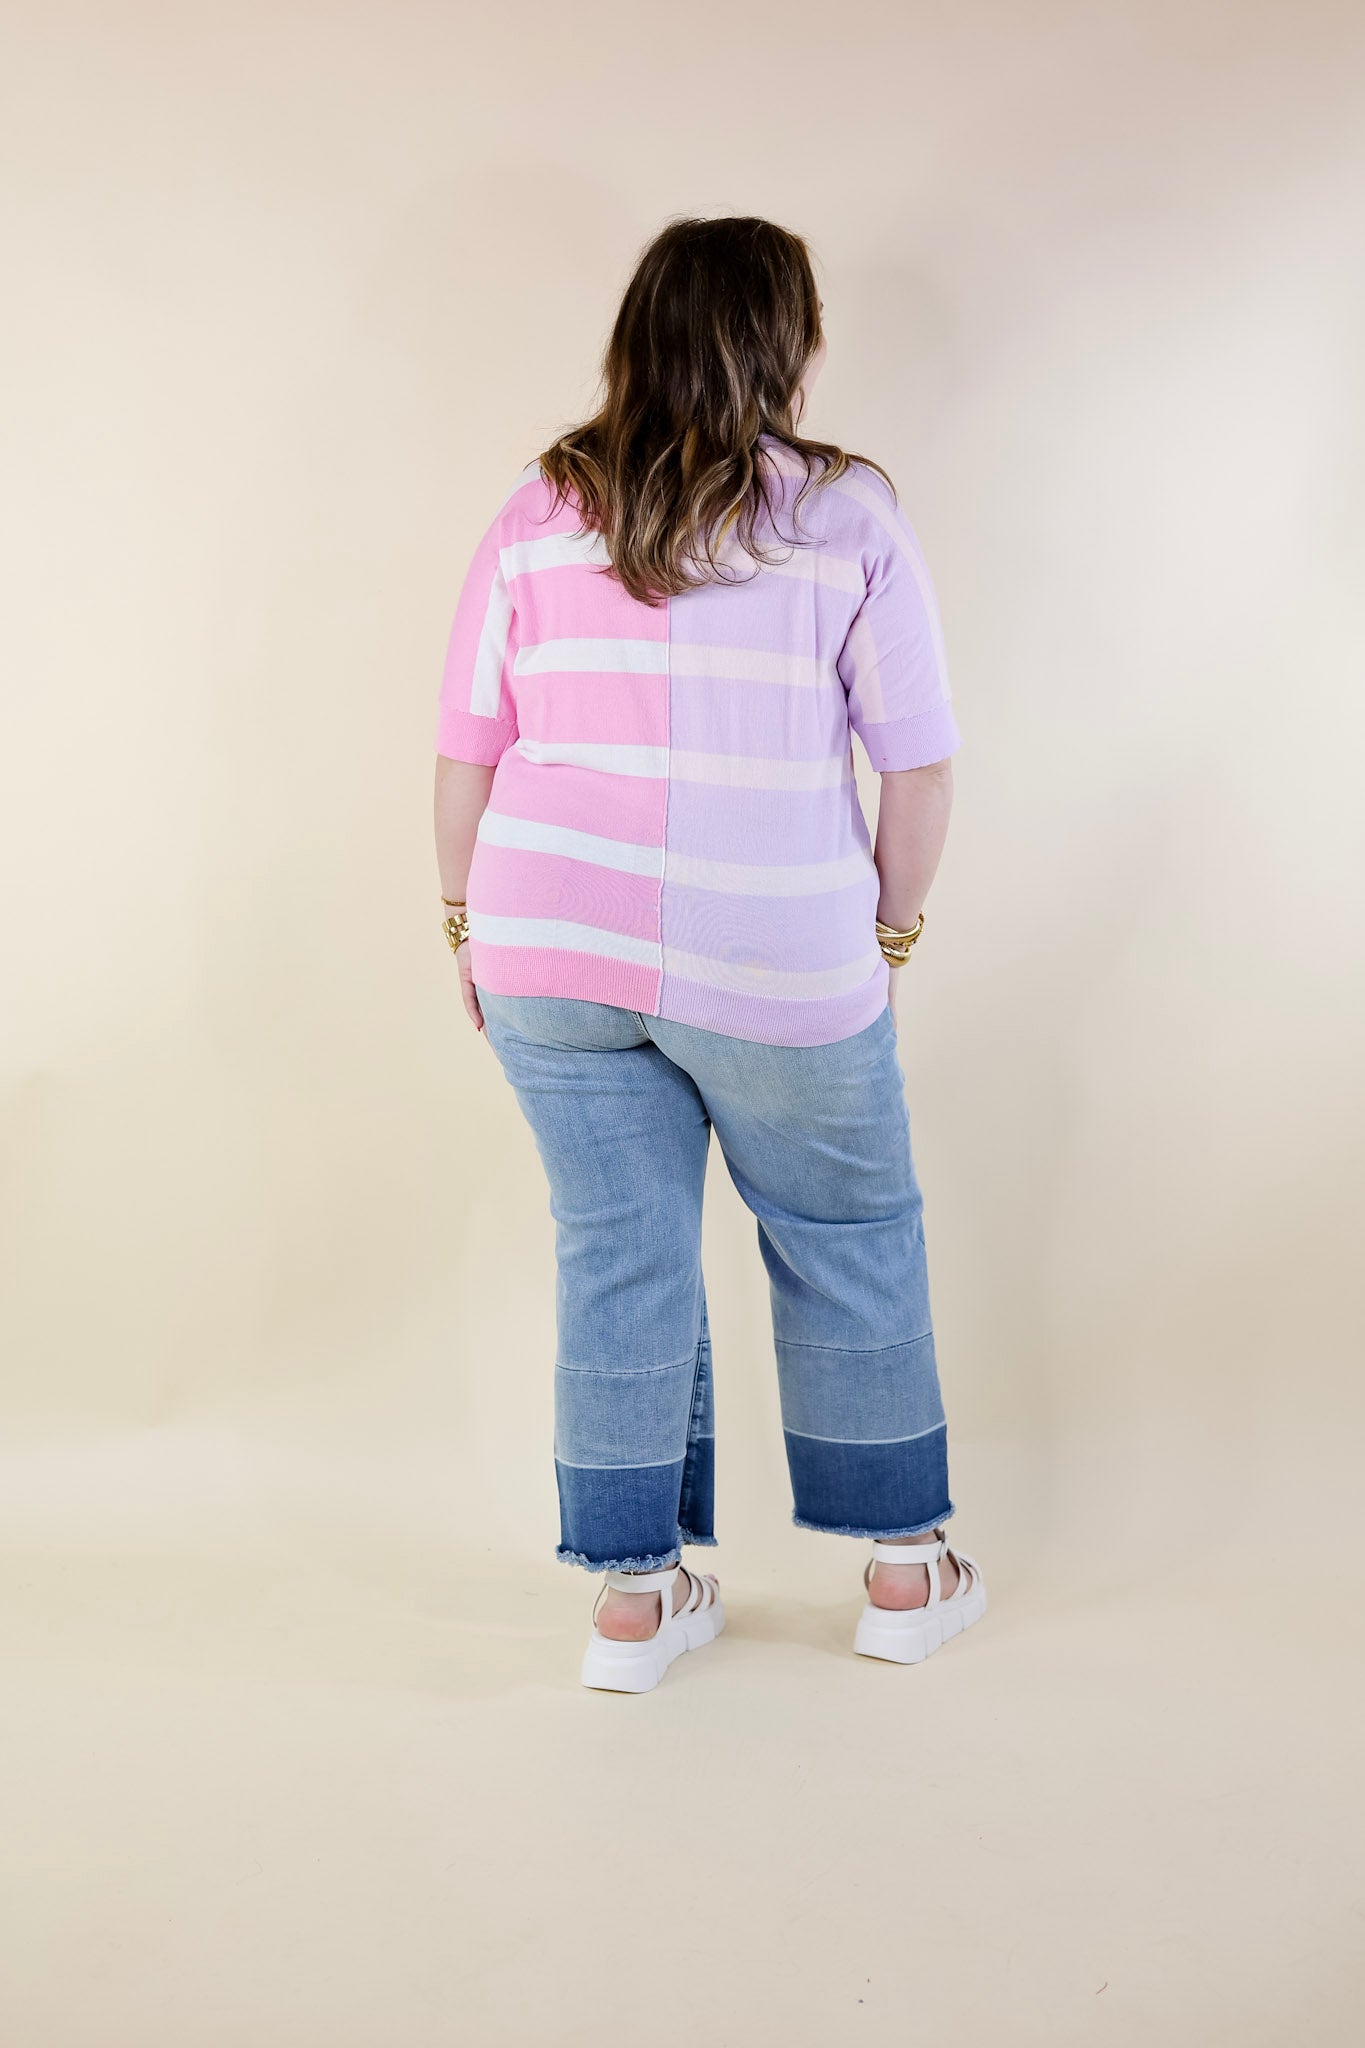 Urban Chic Color Block Striped Knit Top in Purple and Pink - Giddy Up Glamour Boutique